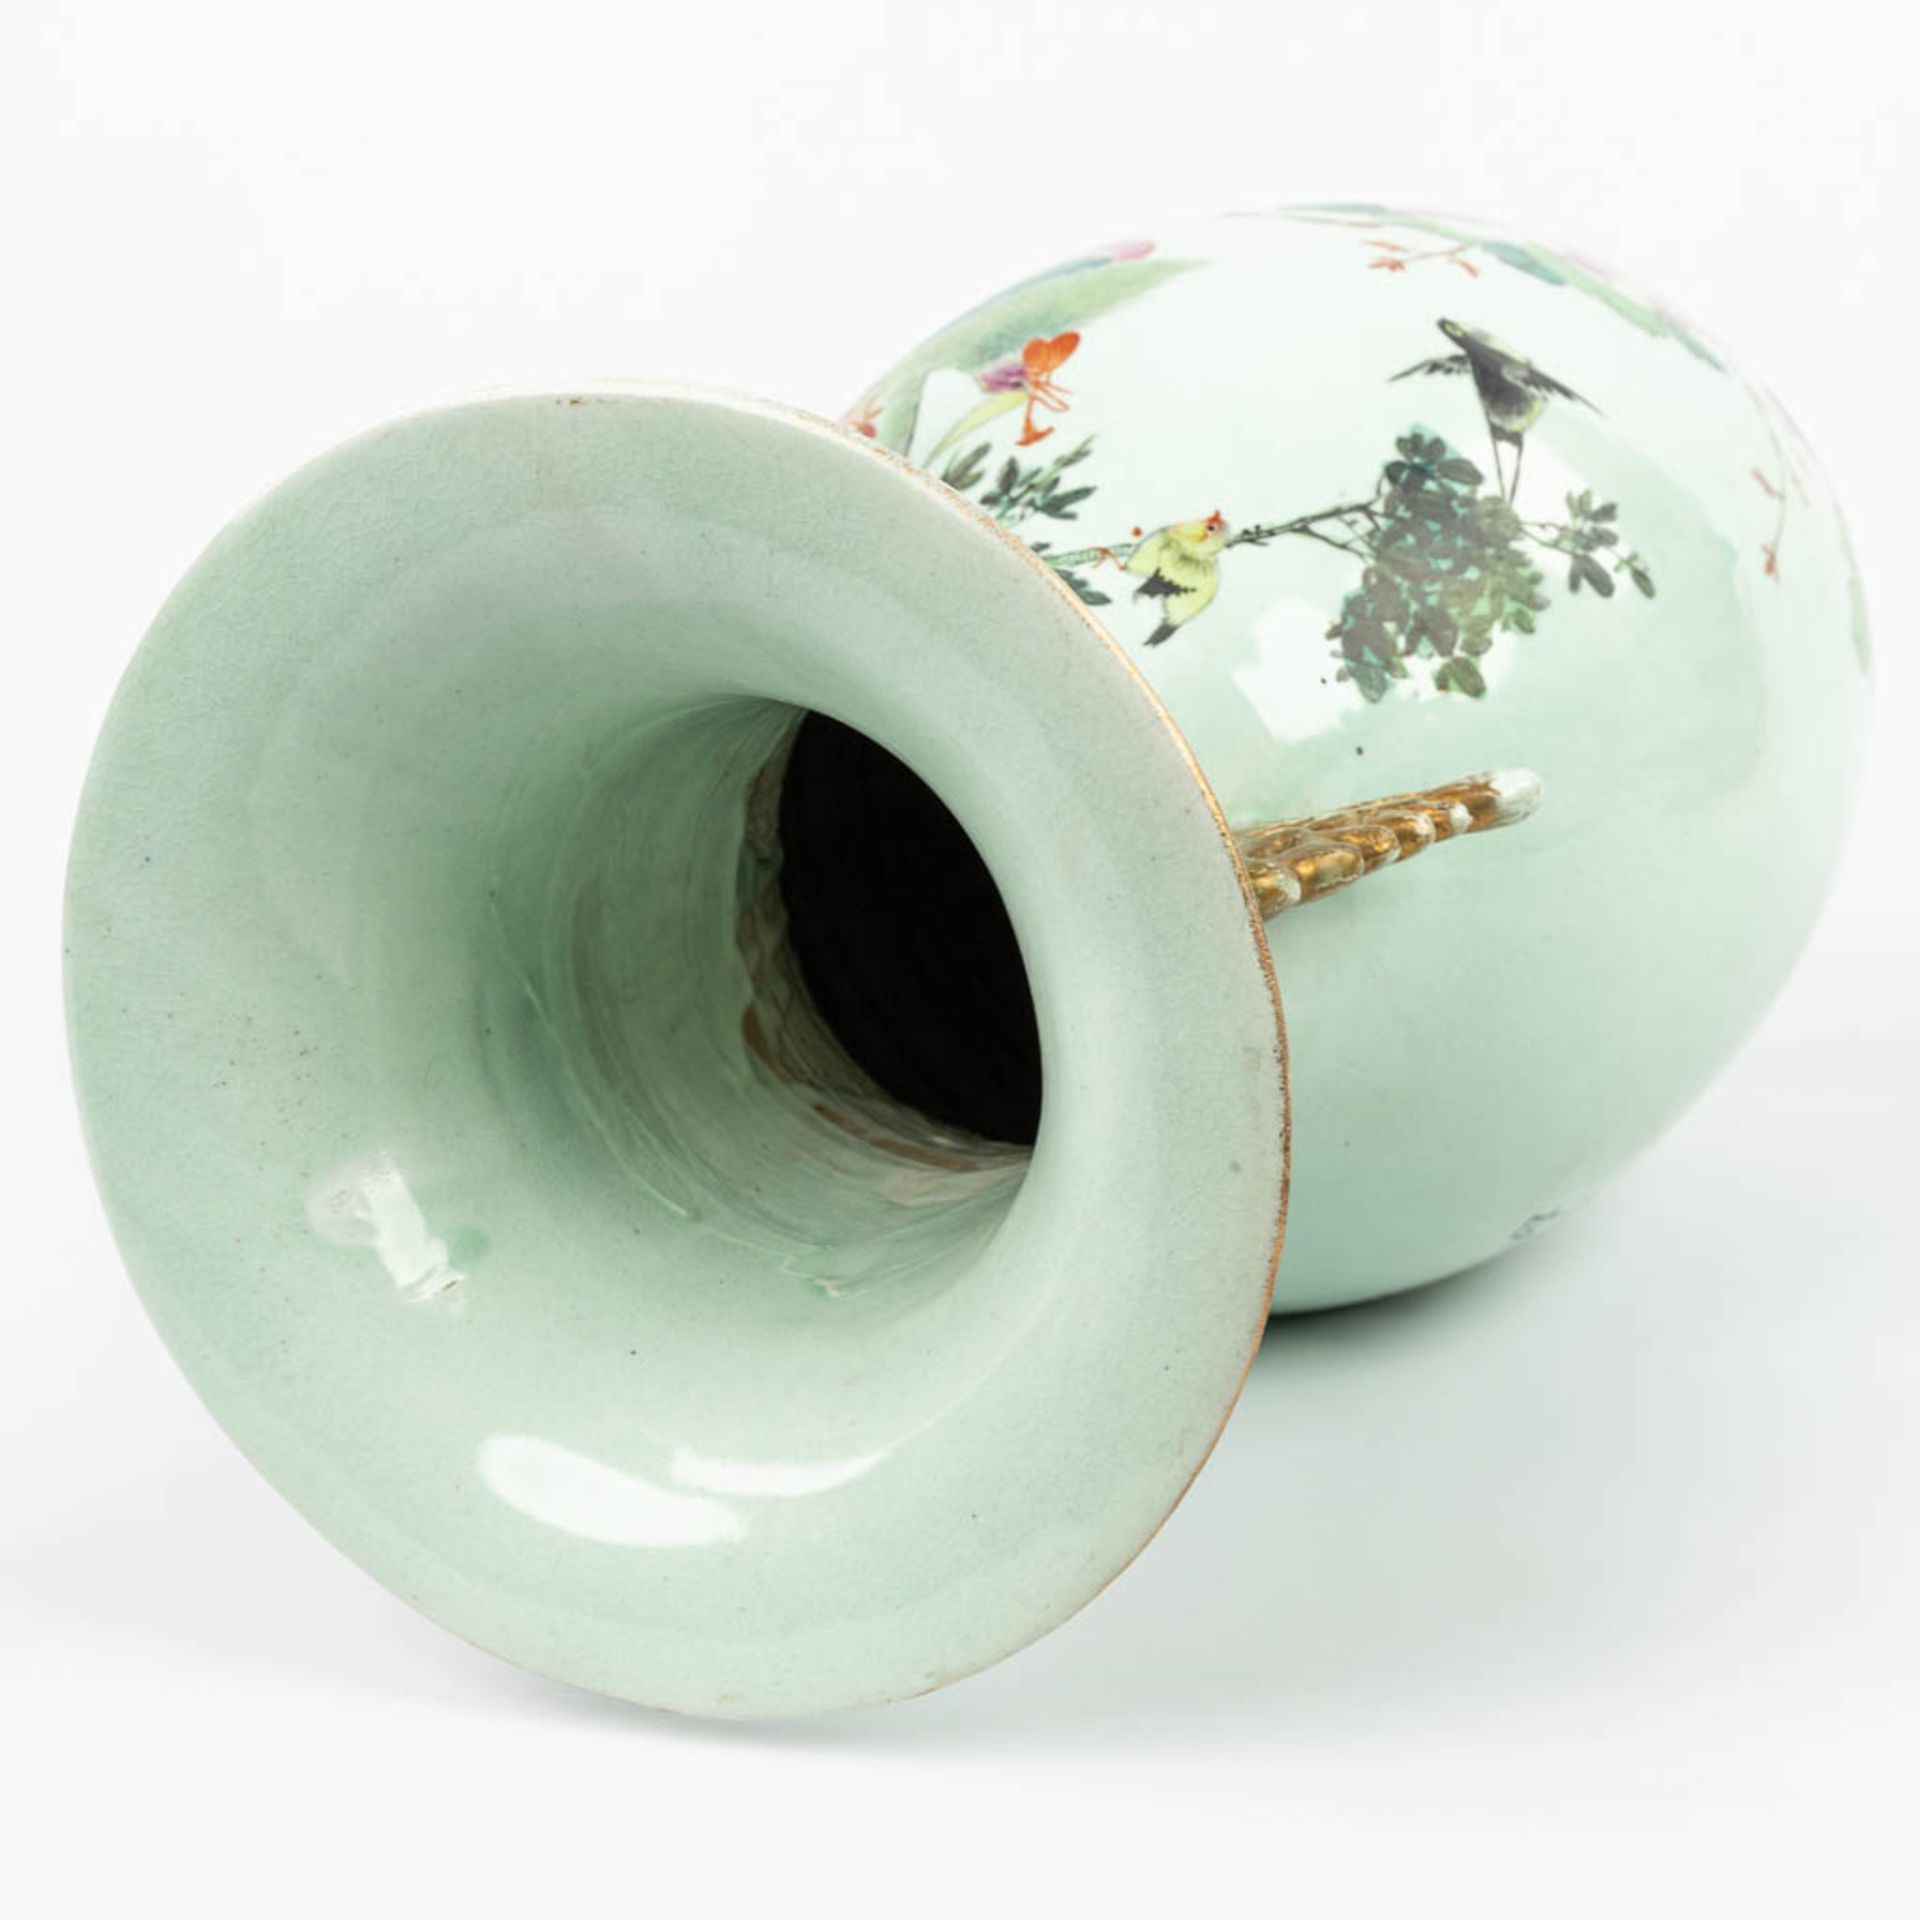 A Chinese vase made of porcelain and decorated with birds. (H:57cm) - Image 7 of 16